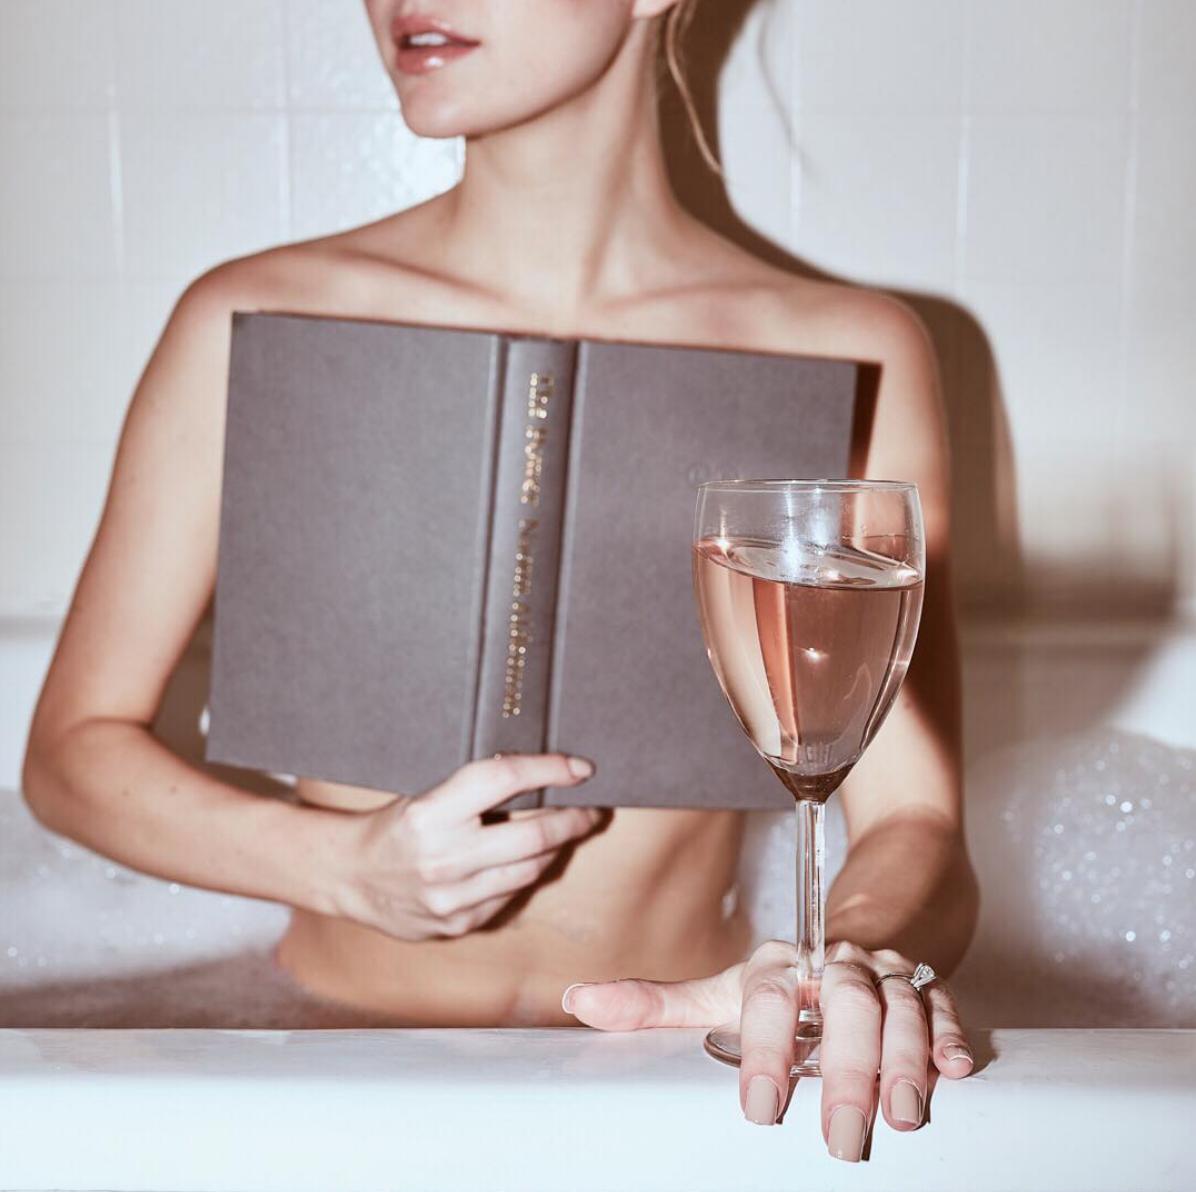 Sunday chilling! 🛀🍷
Need a new outfit? Enter our March competition yet! 💕
Head to our page for more info! 
#dress #minidress #ootd 
#thecultboutique 
#girlgang #bloggerstyle #springvibes #glam #boutique #bloggersuk #celebritystyles #boutiqueuk #partylooks